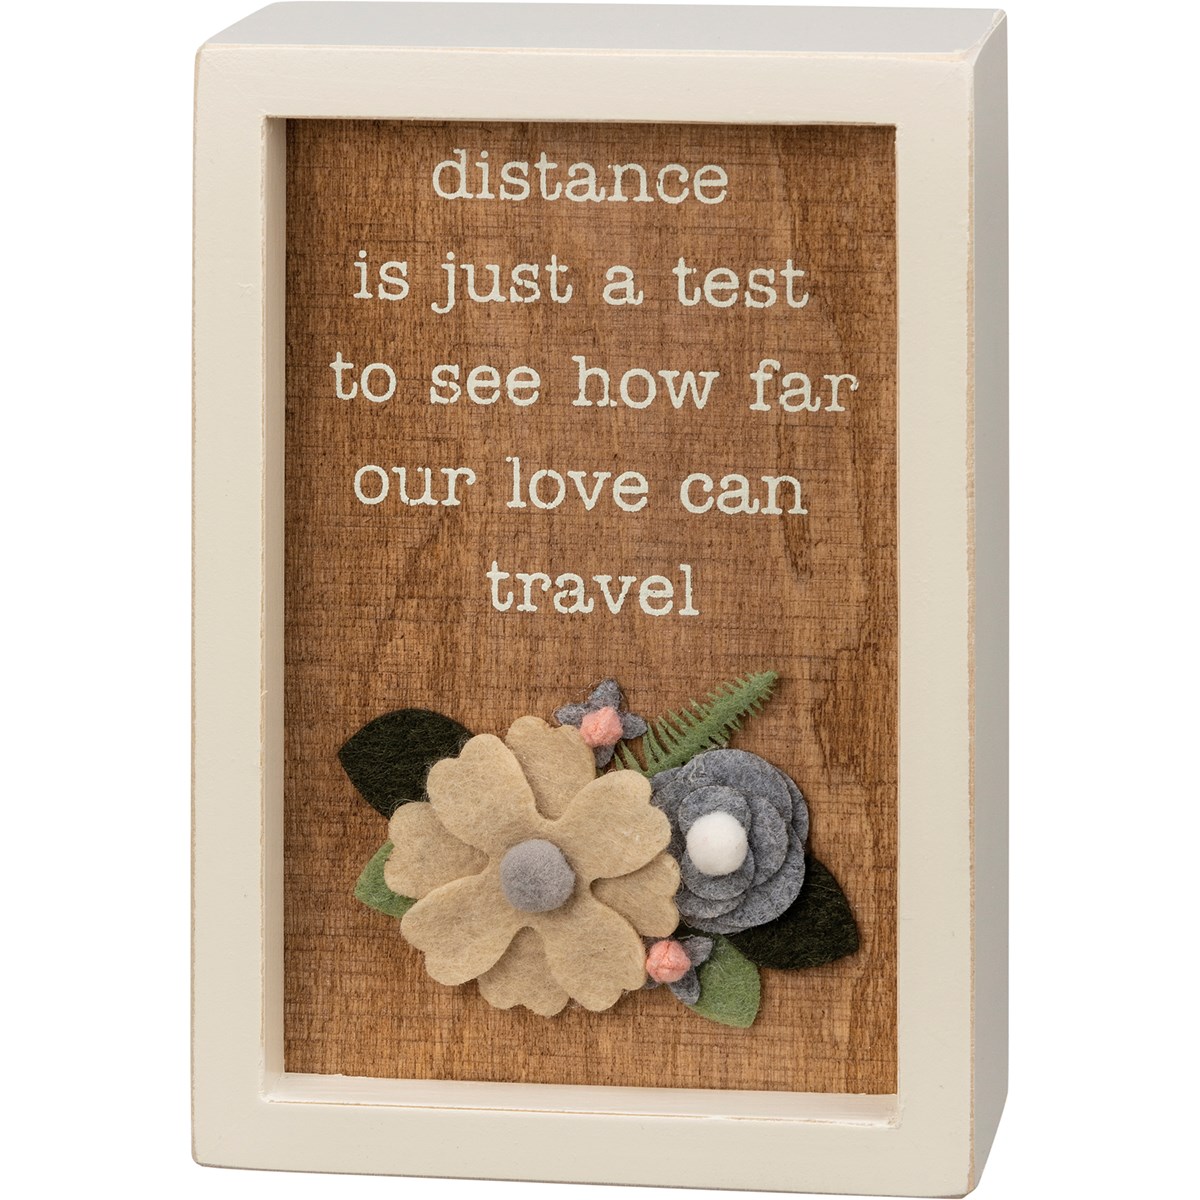 Distance Is Just A Test Inset Box Sign - Wood, Felt